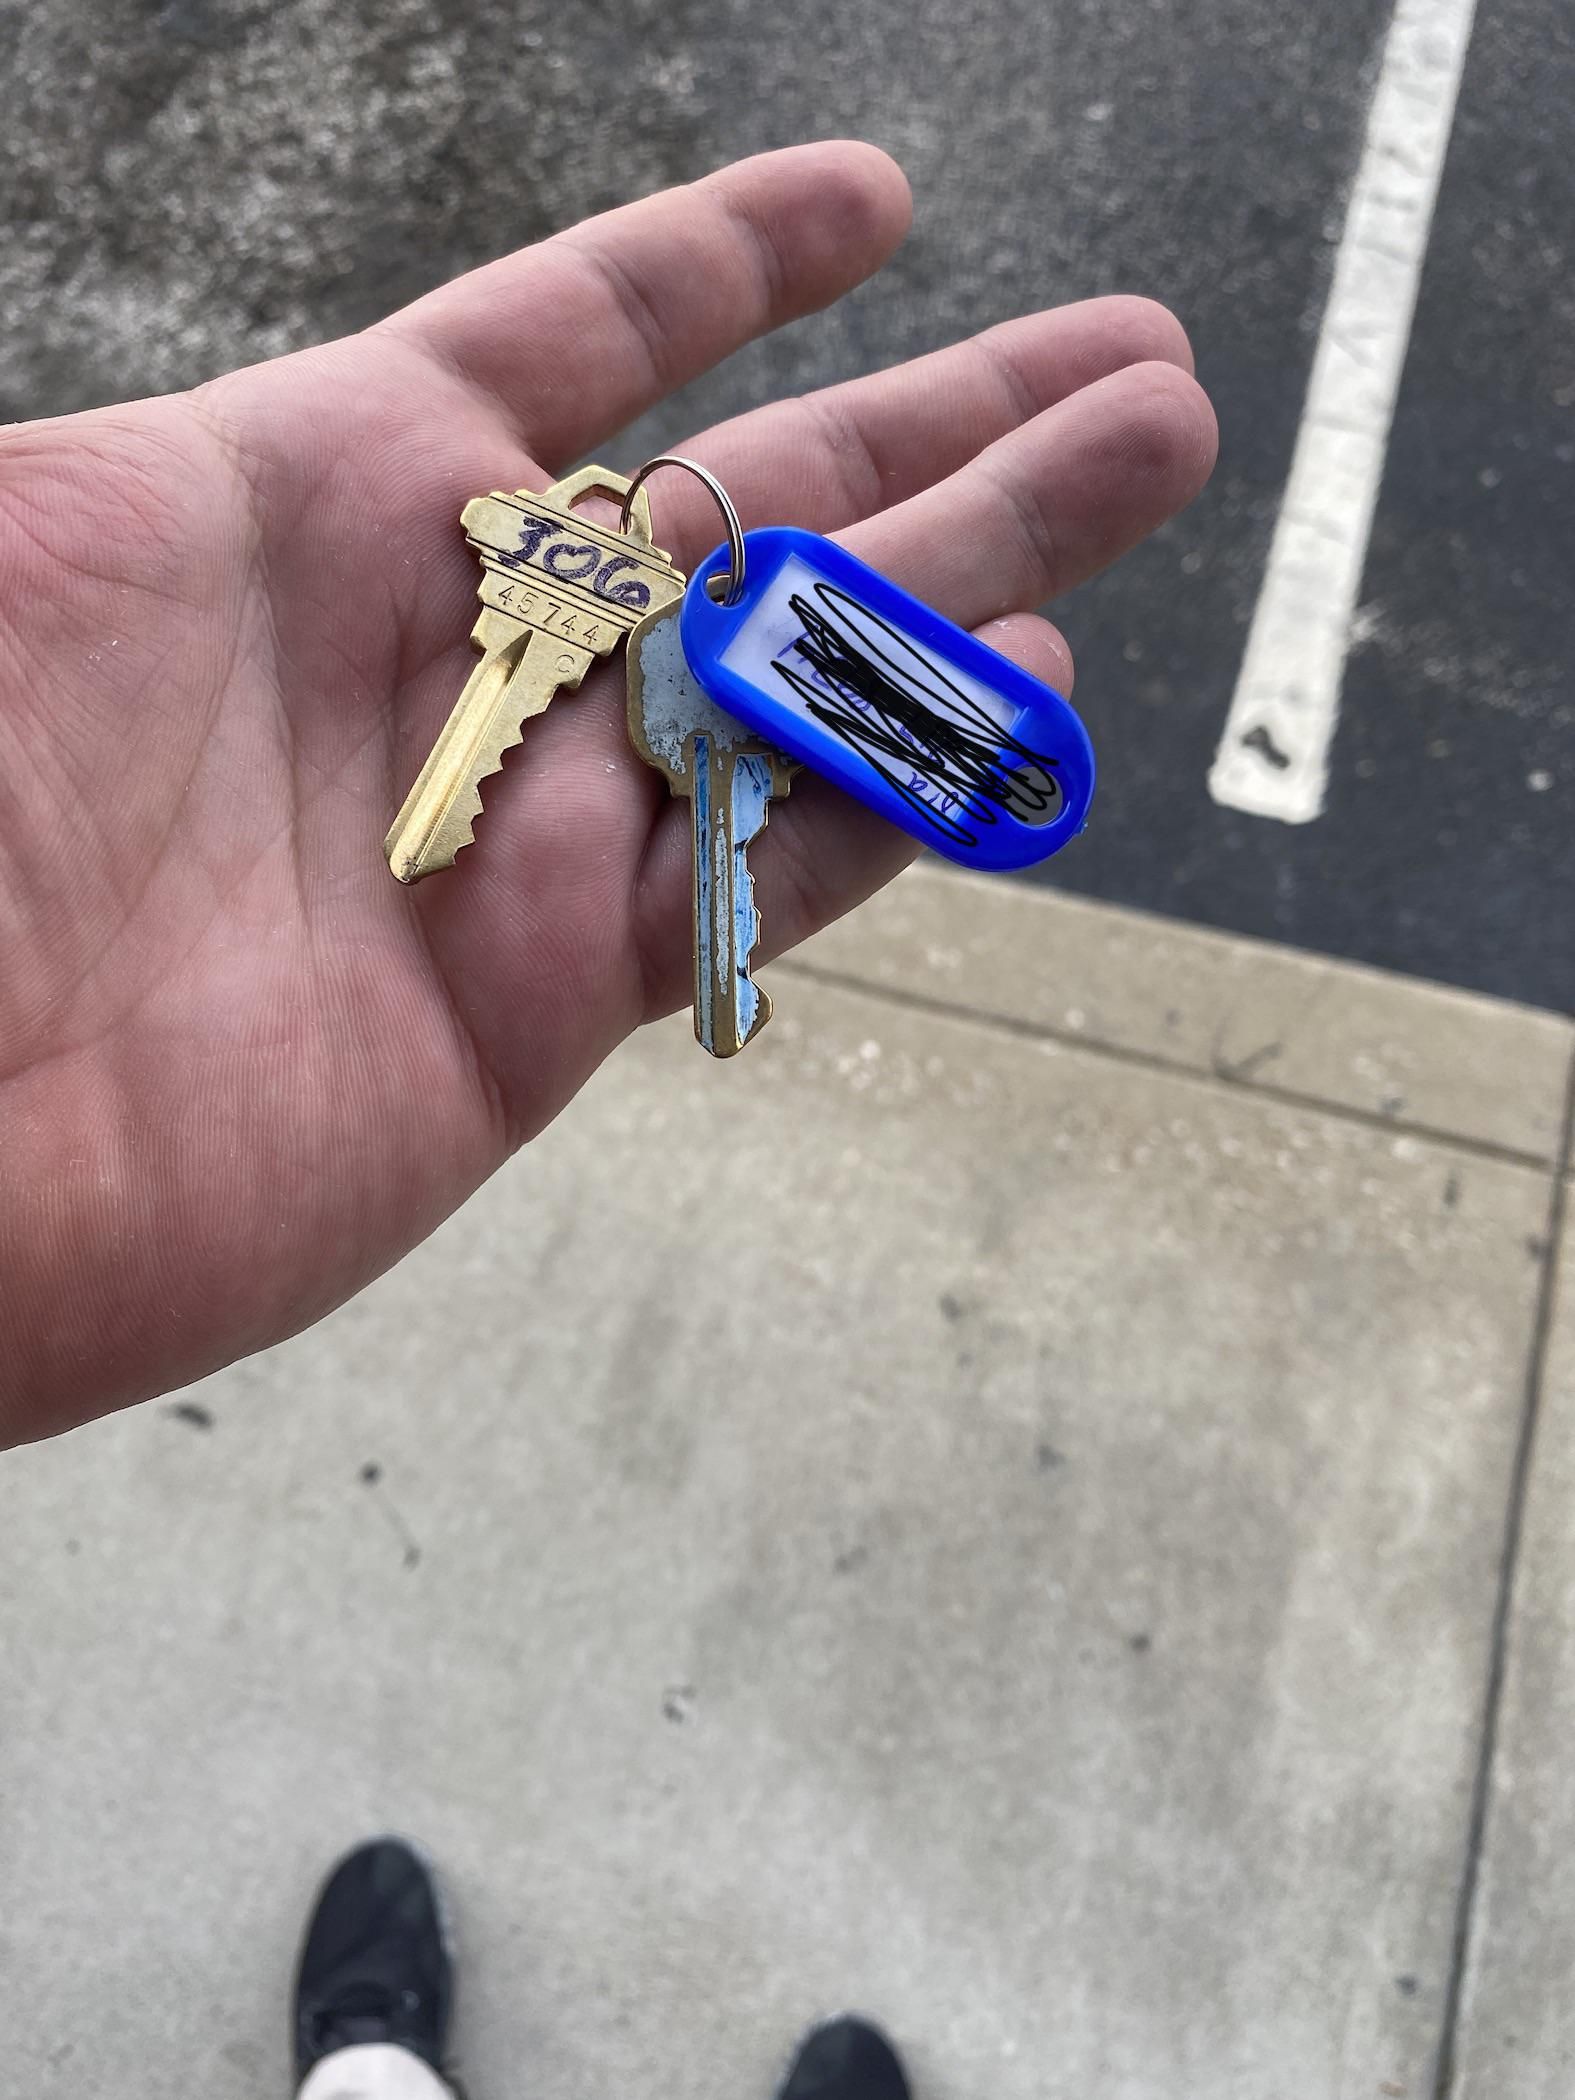 Best prank ever. Found these keys outside my work. Called the number on them. Apparently, dozens of sets of these keys were spread all over our town and the guy had been getting calls all day.